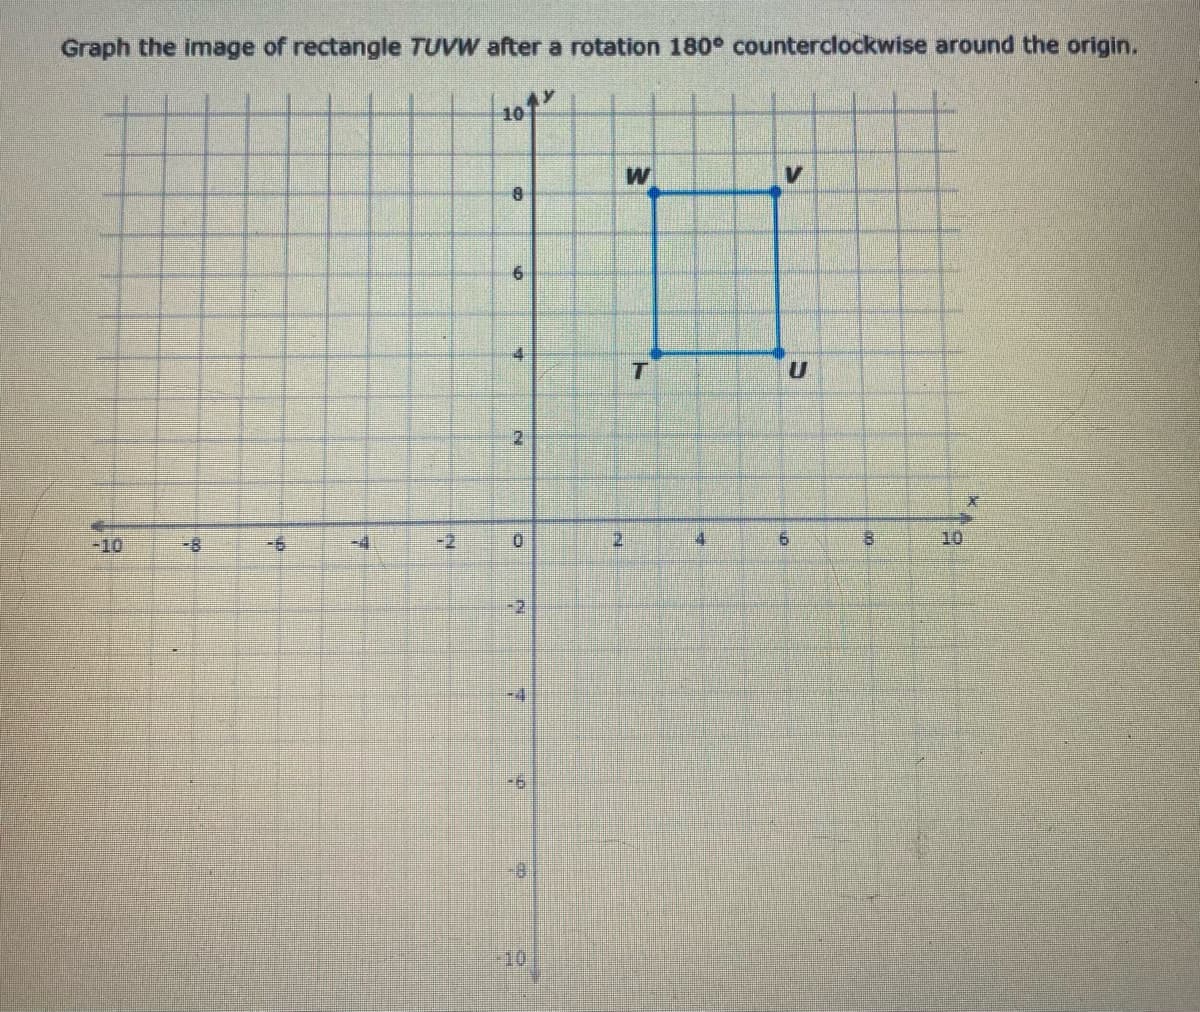 Graph the image of rectangle TUVW after a rotation 180° counterclockwise around the origin.
101
W
8.
21
-10
-4
-2
9.
10
-2
一4
9-
4.
9.
